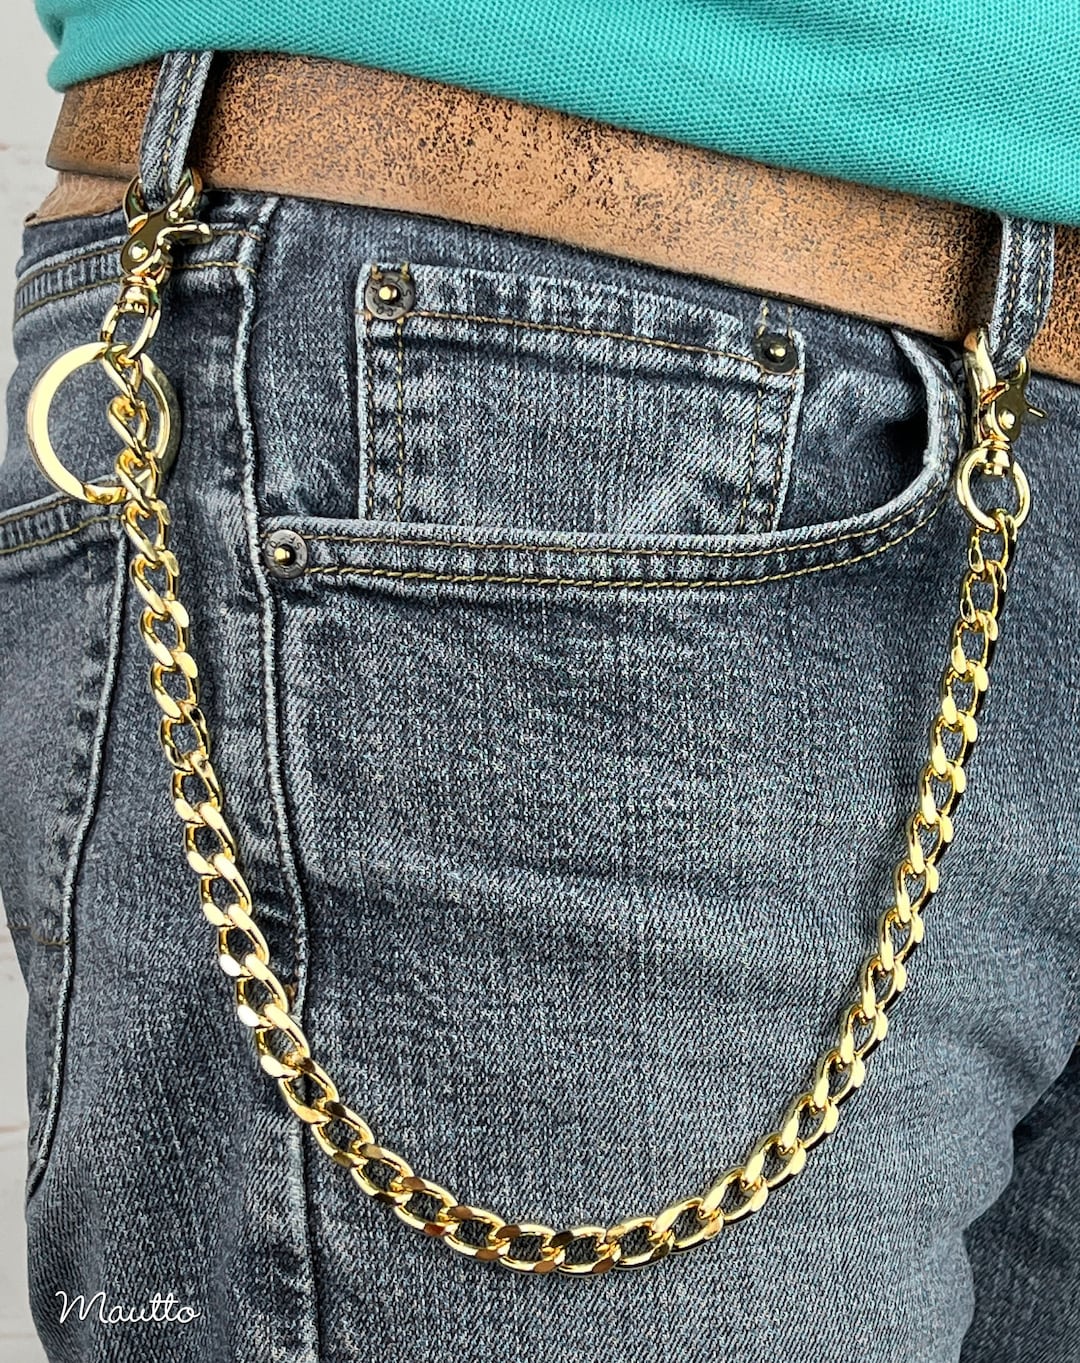 Styling the Louis Vuitton Denim Loop, Look polished not cheap